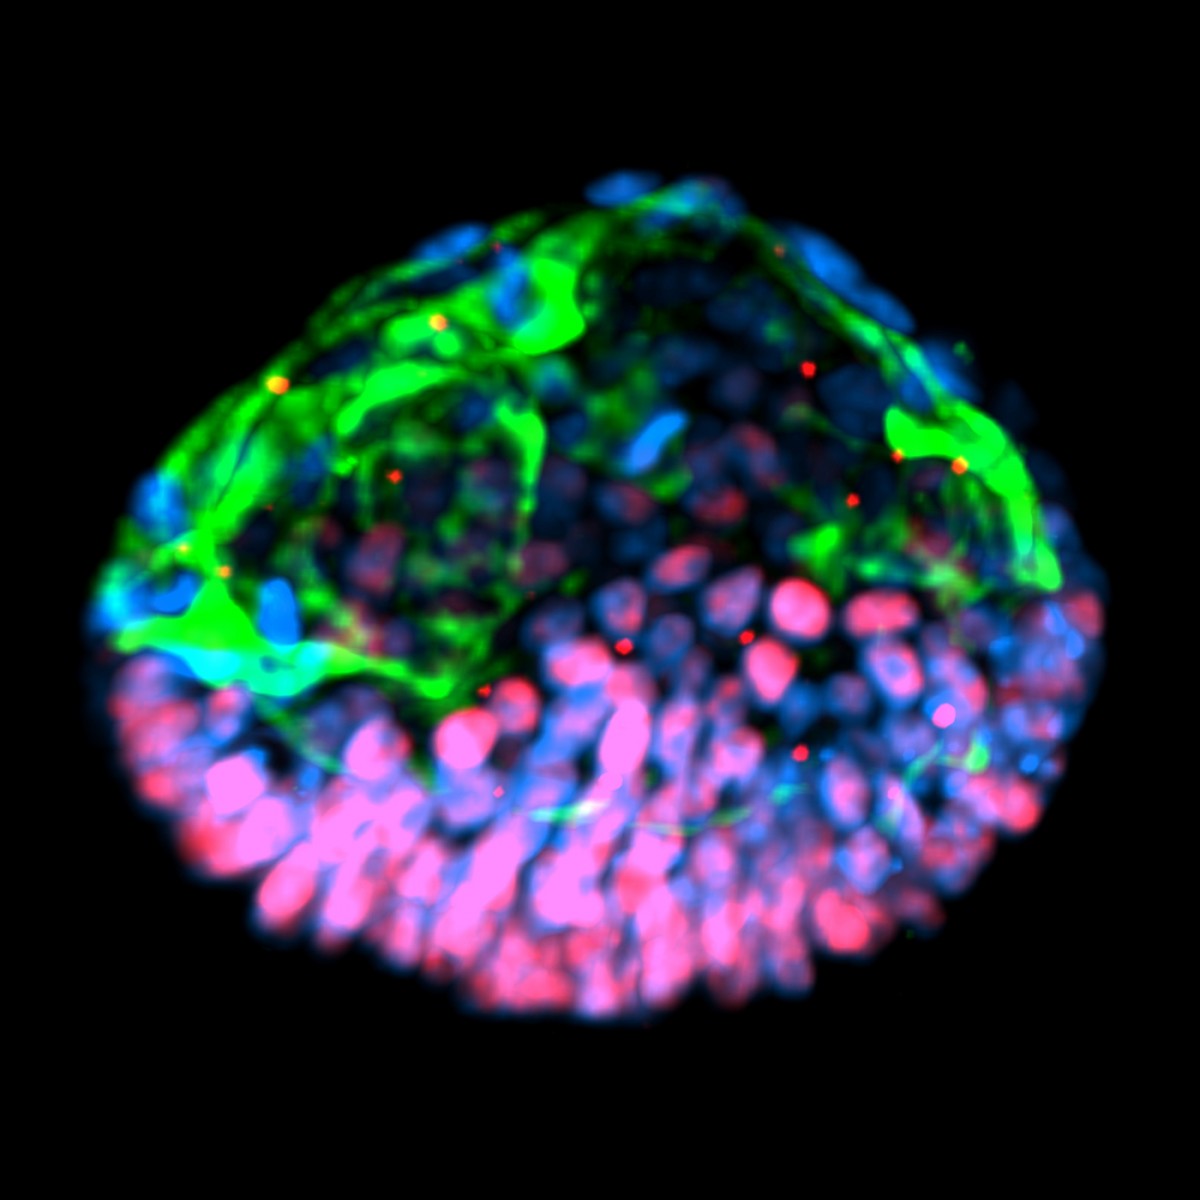 An embryoid created from stem cells shares